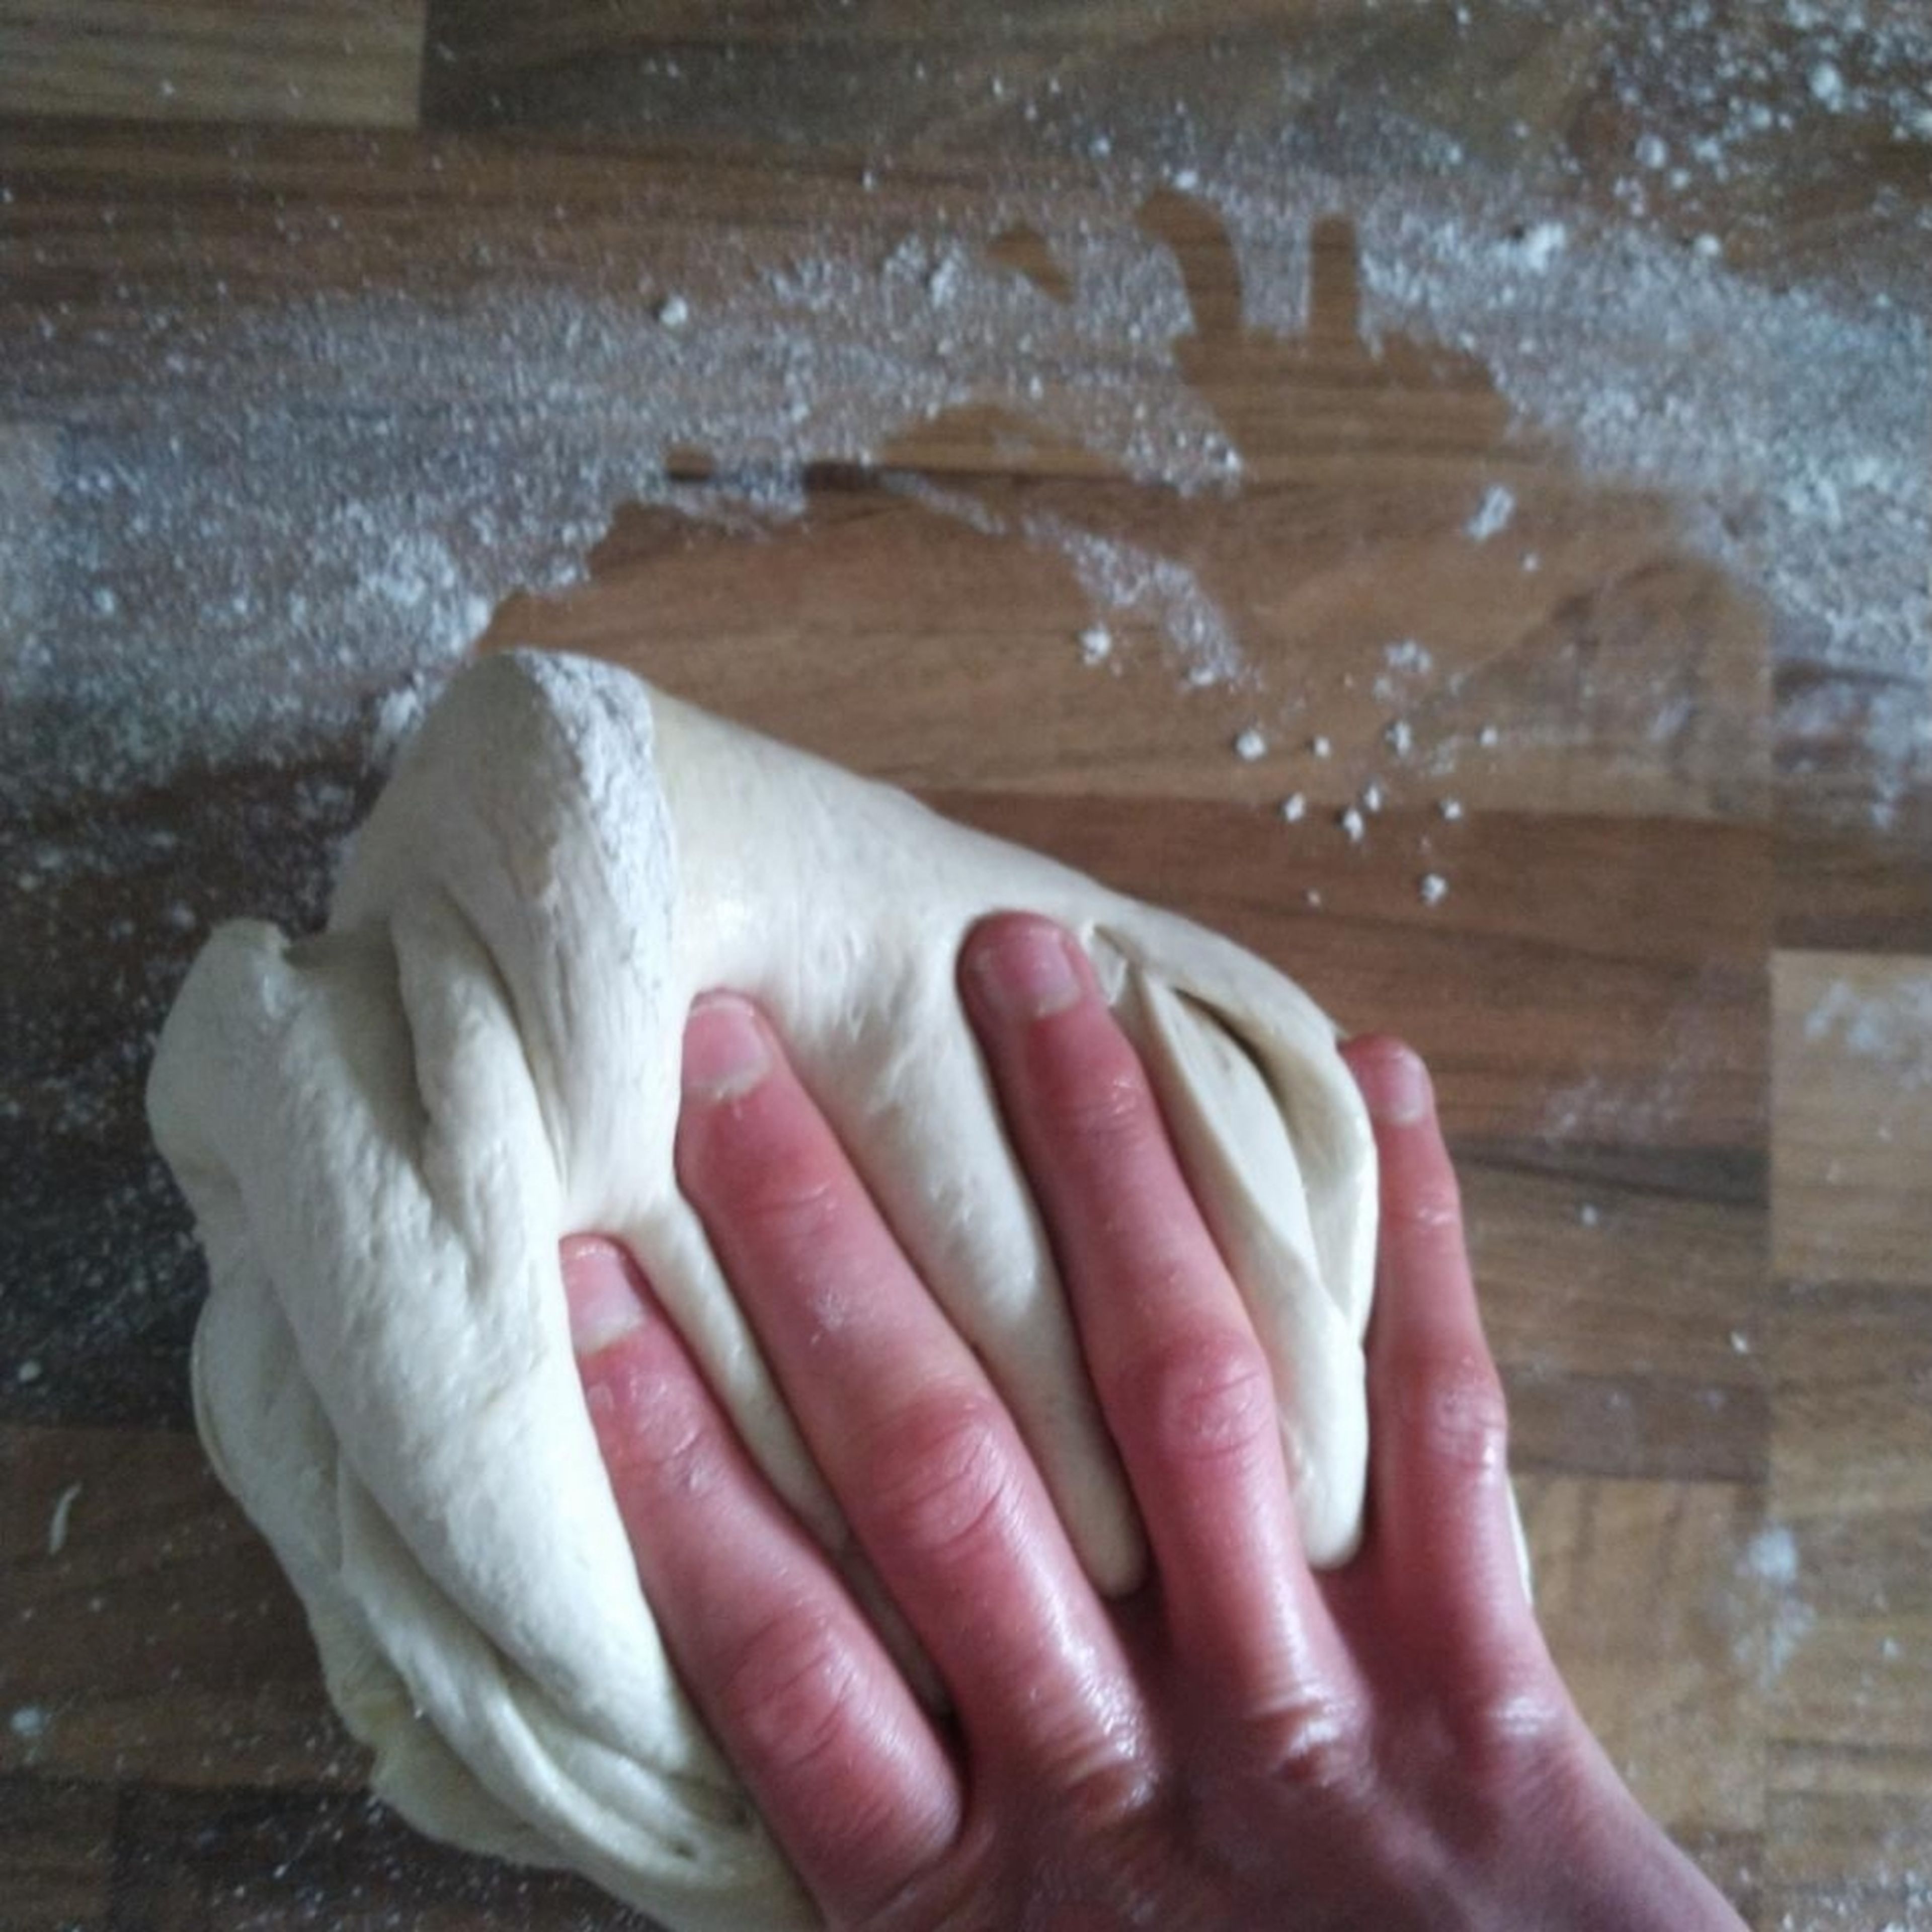 Need once more for a few minutes to bring the dough back together, after punching it down. Try to fold the dough onto itself whilst kneading to get rid of any air bubbles.